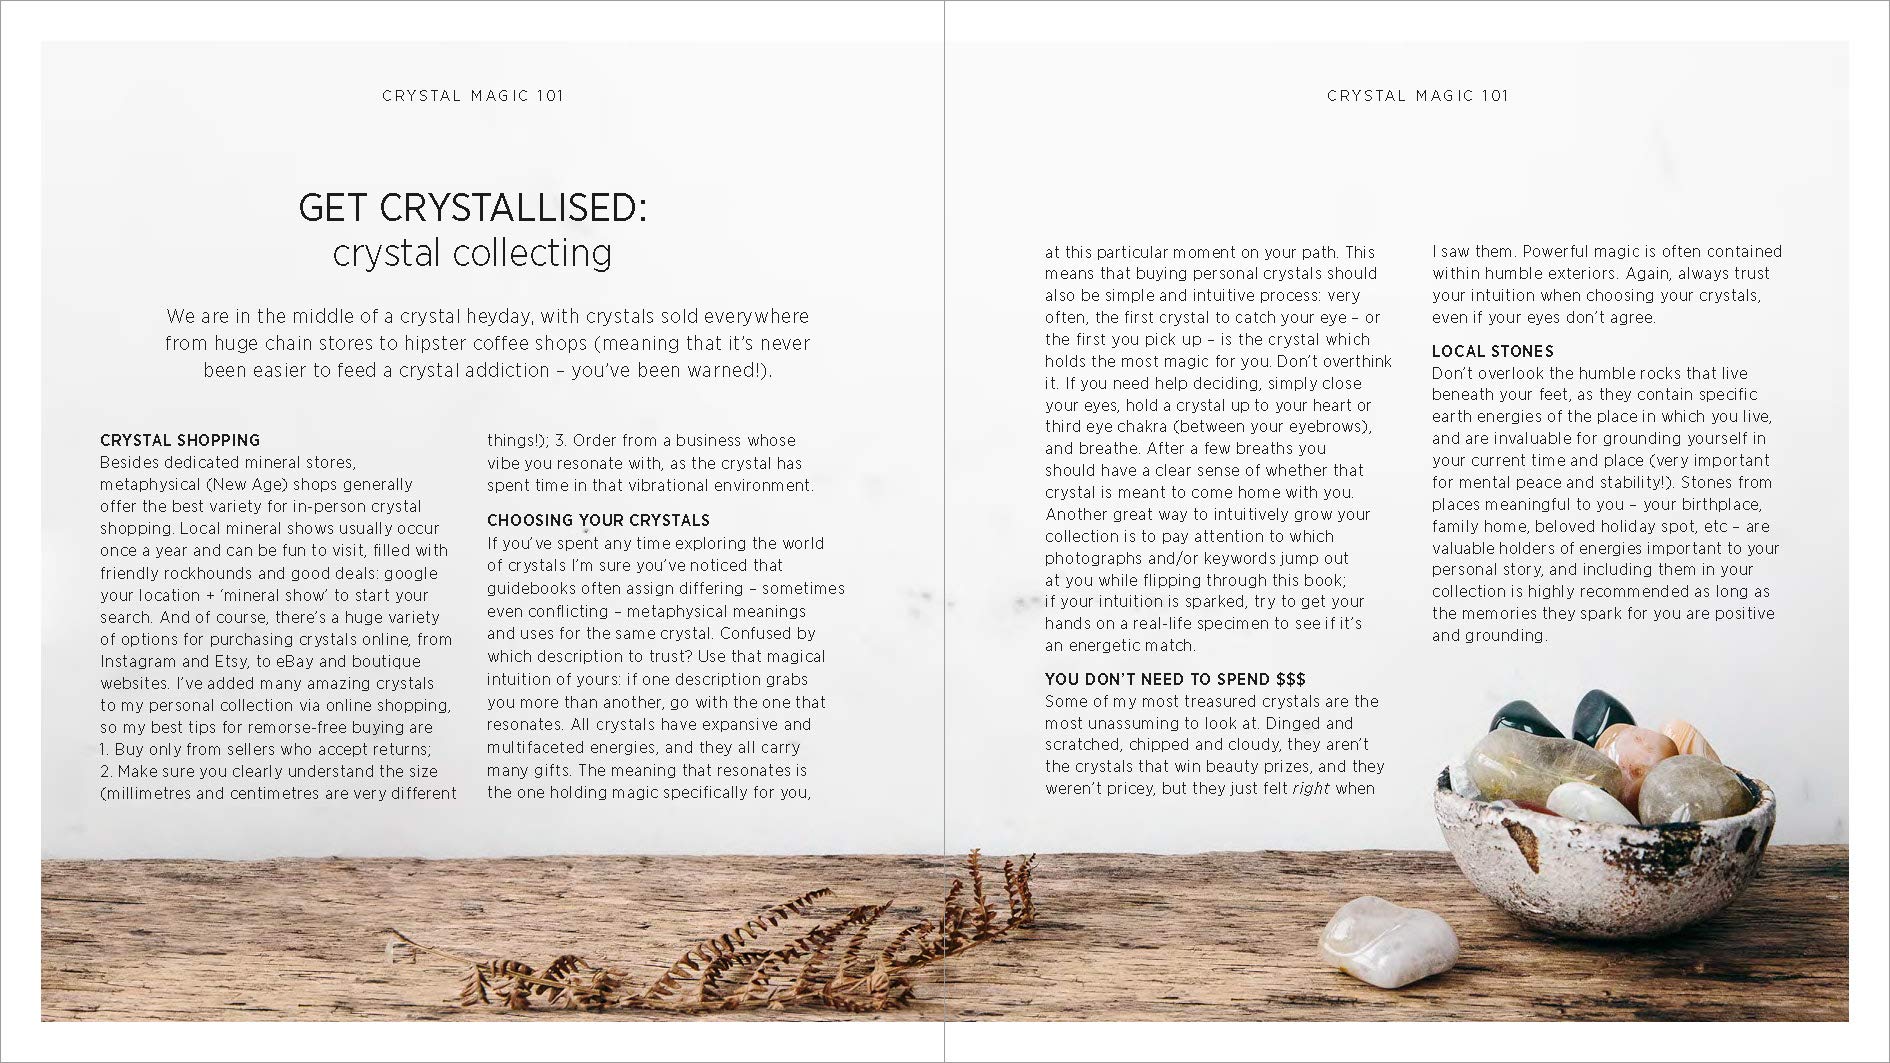 Crystals: The Modern Guide to Crystal Healing - Wanderlustre